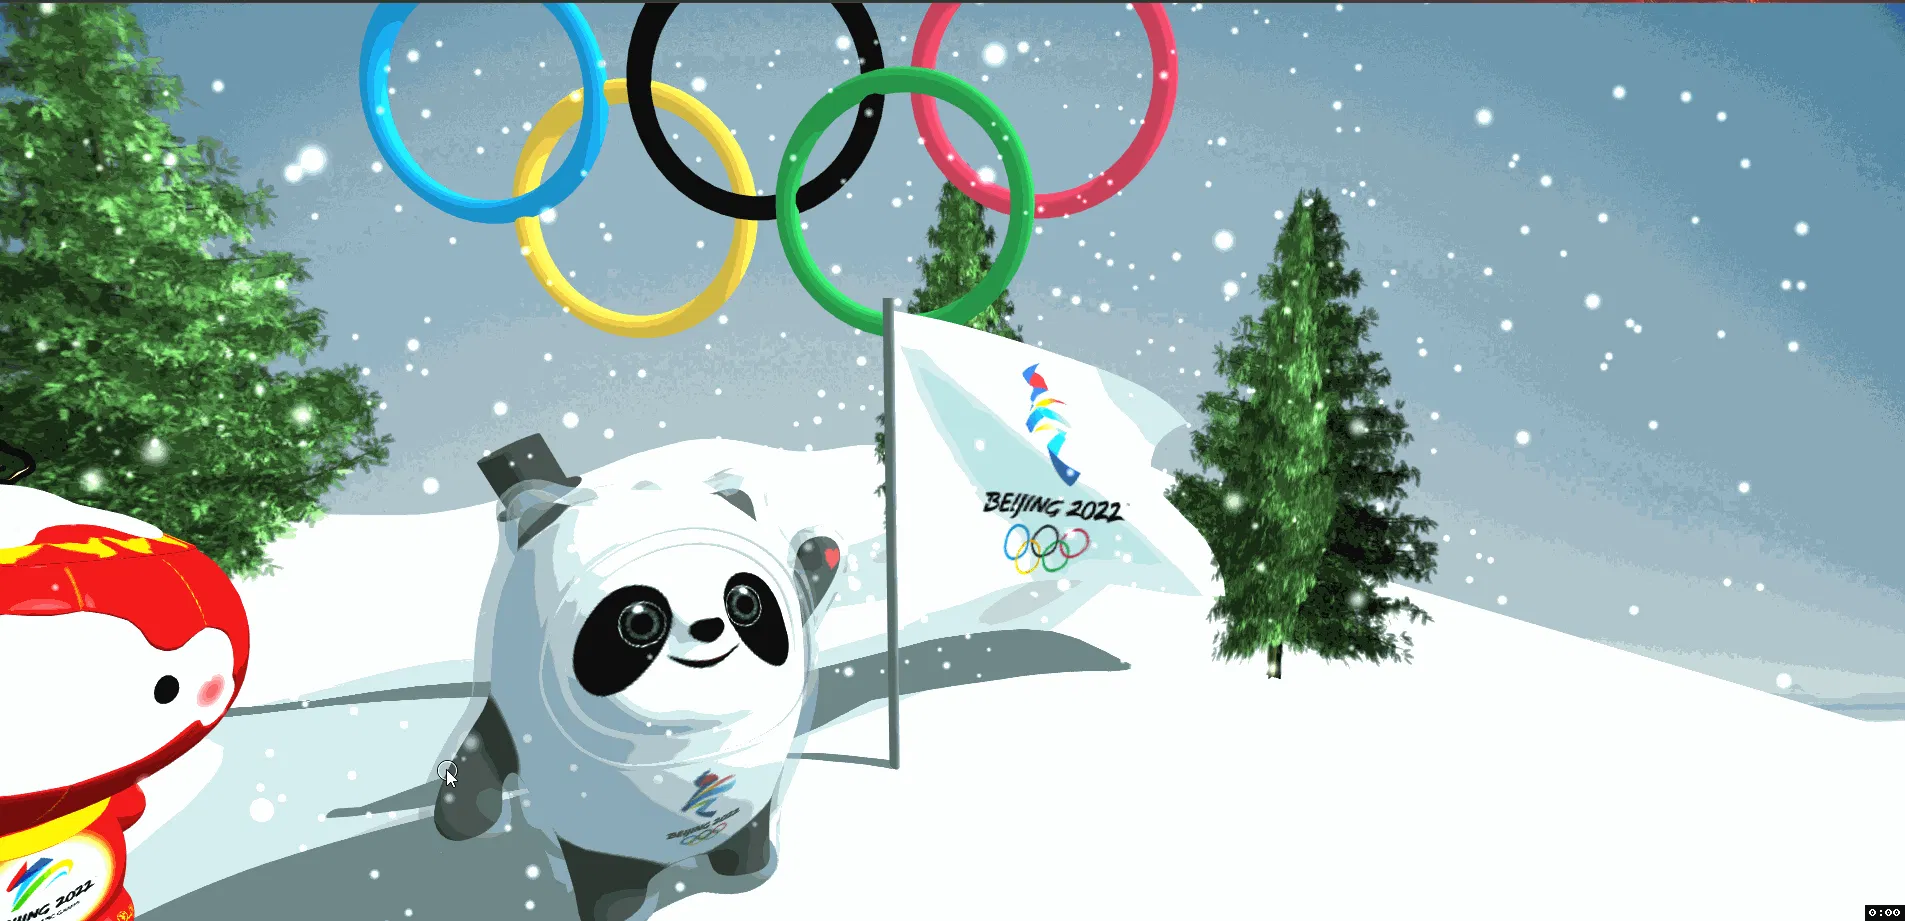  3D webpage version of the Winter Olympic Games mascot Ice Pier